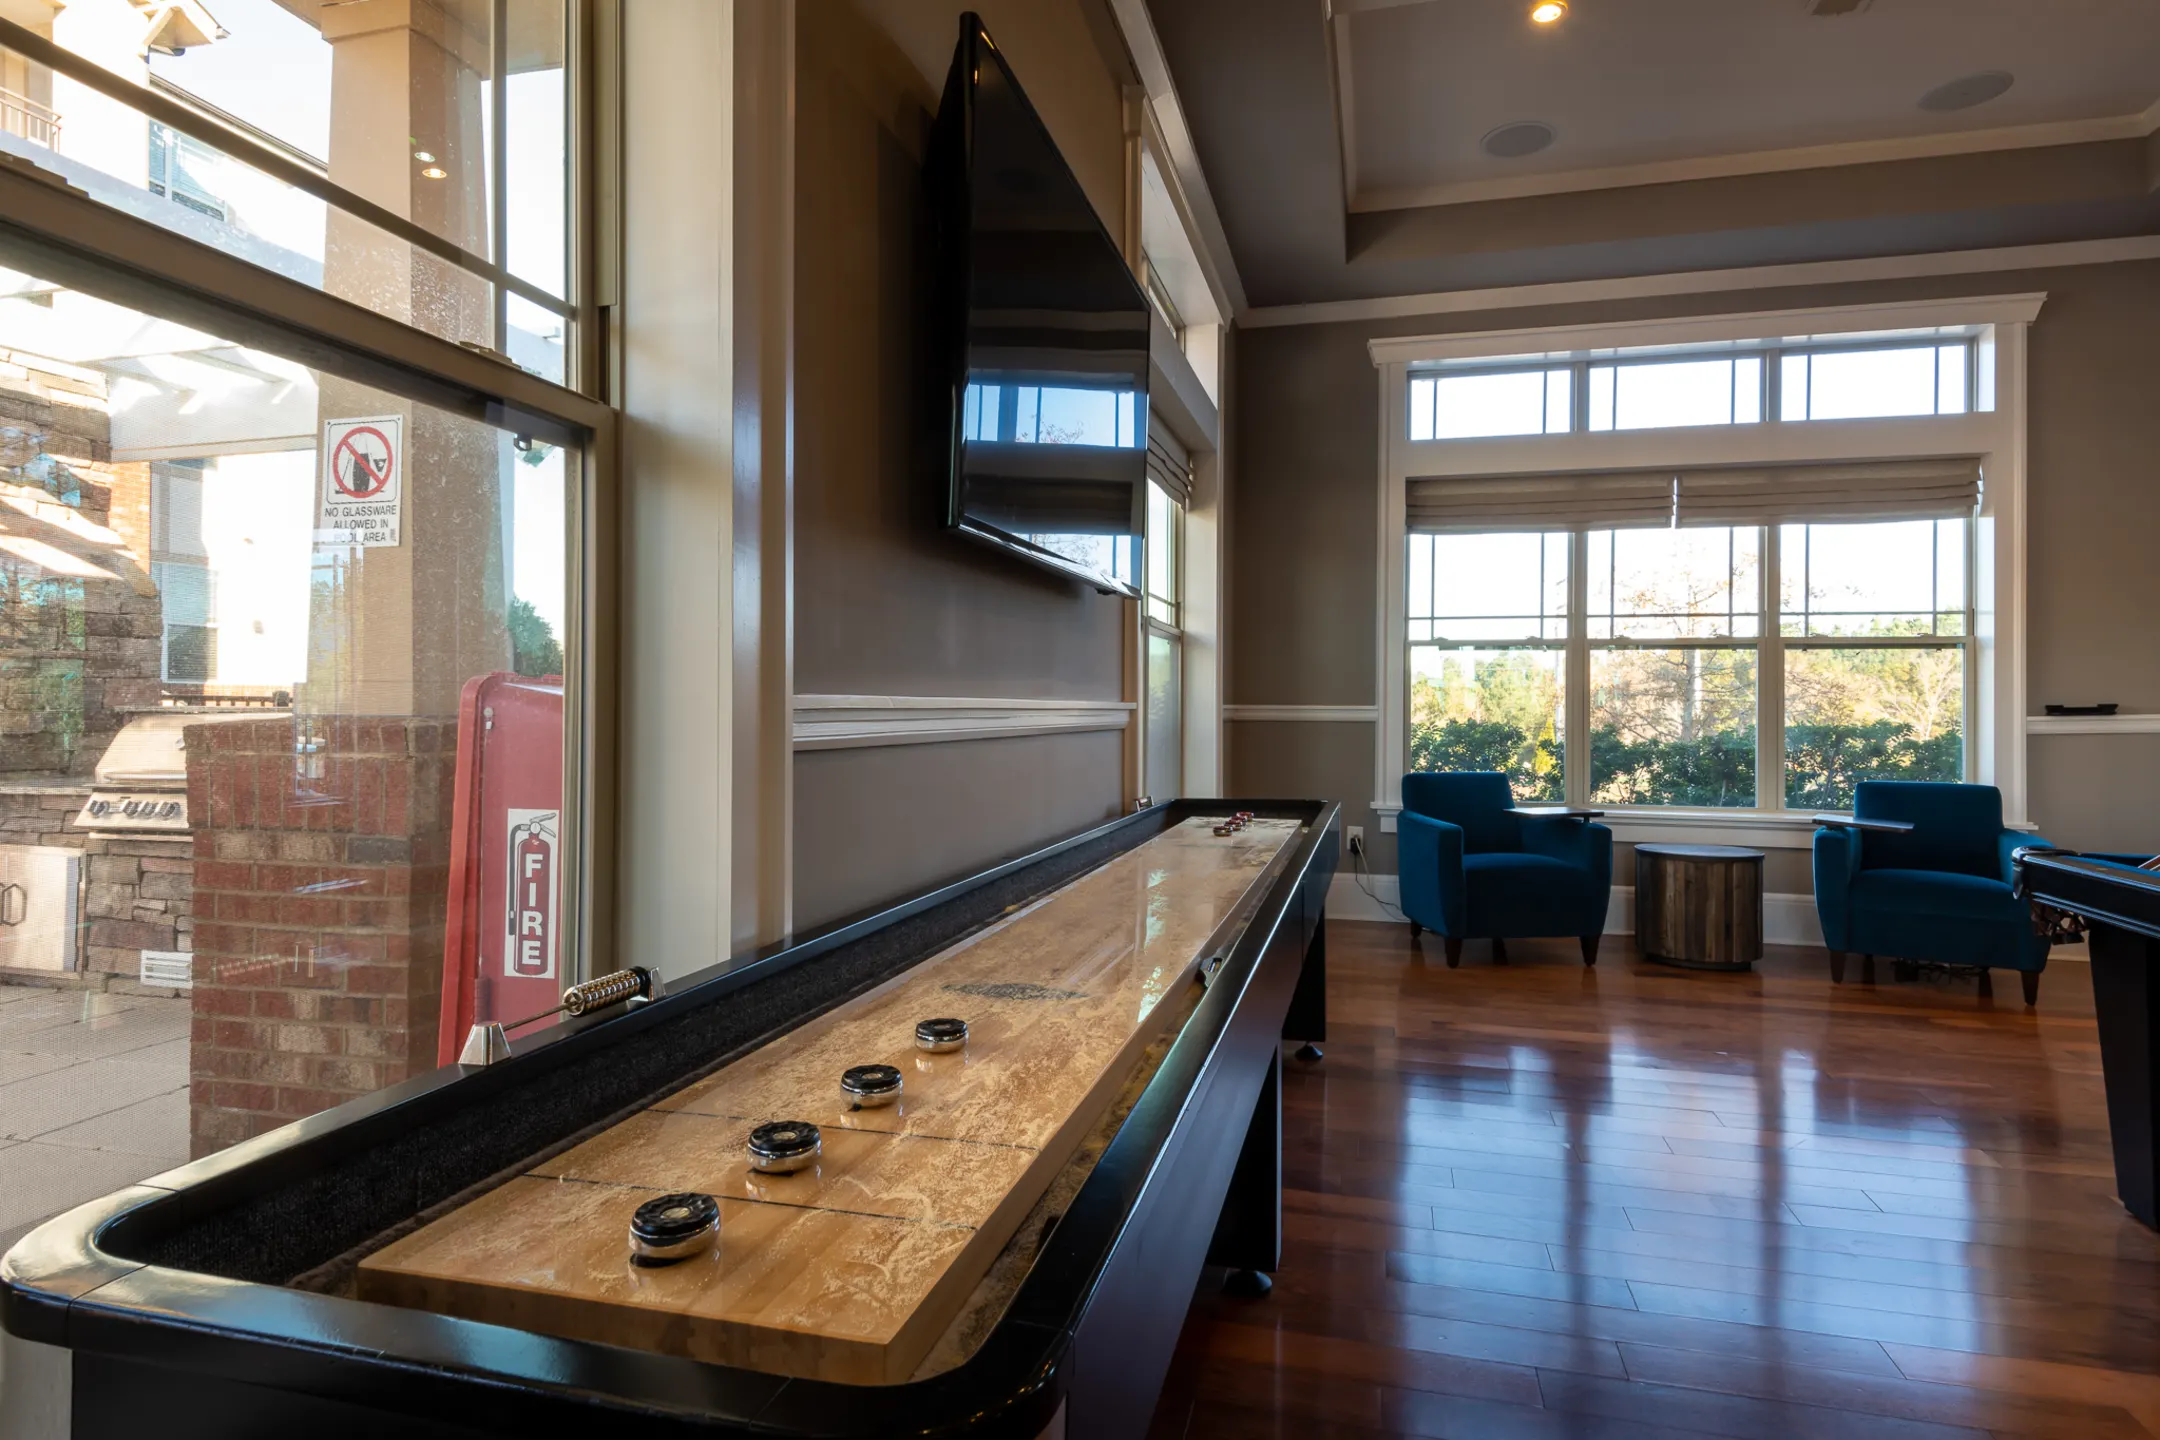 Fitness Weight Room - The Crest At Brier Creek Apartments - Raleigh, NC